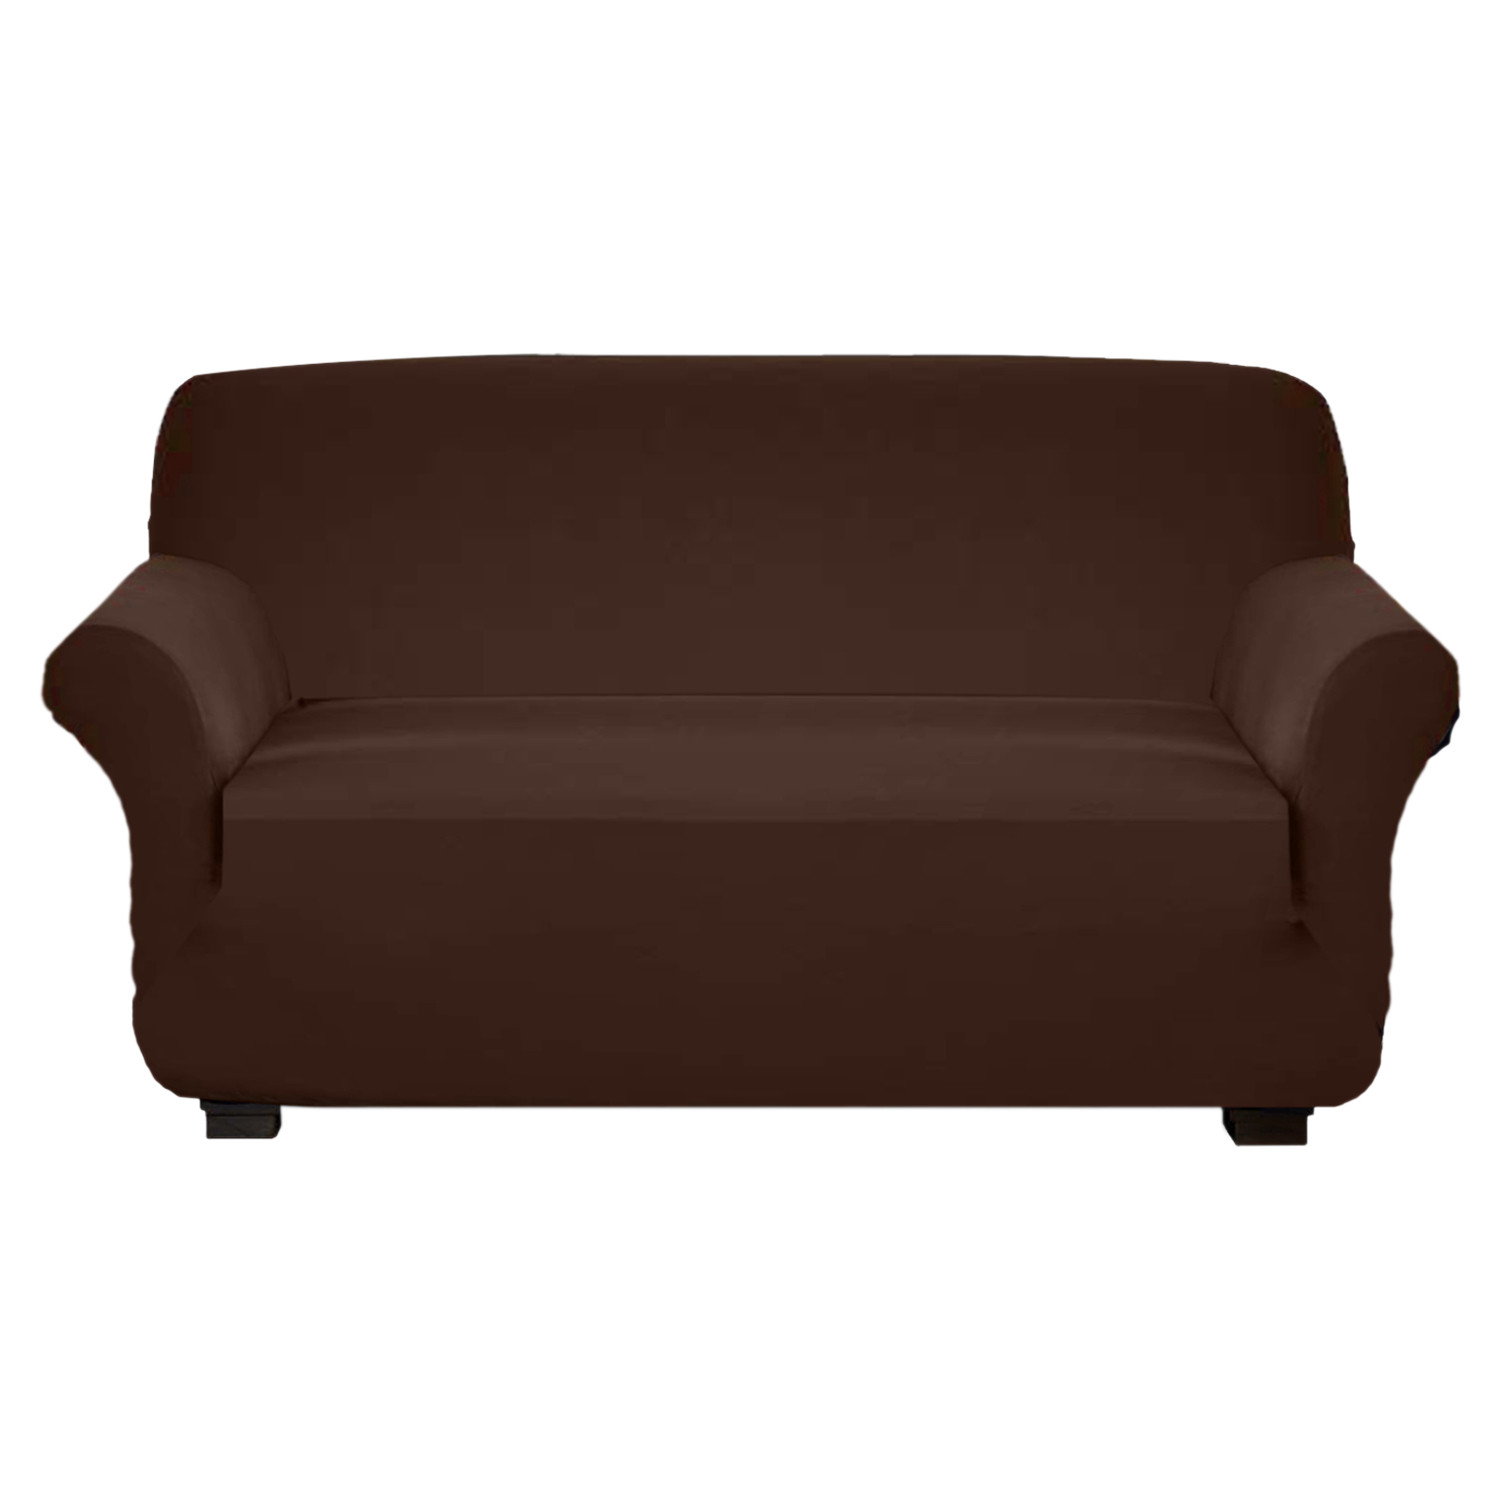 Kuber Industries Stretchable, Non-Slip Polyster 1 & 3 Seater Sofa Cover & Chair Cover Set, Set of 3 (Brown)